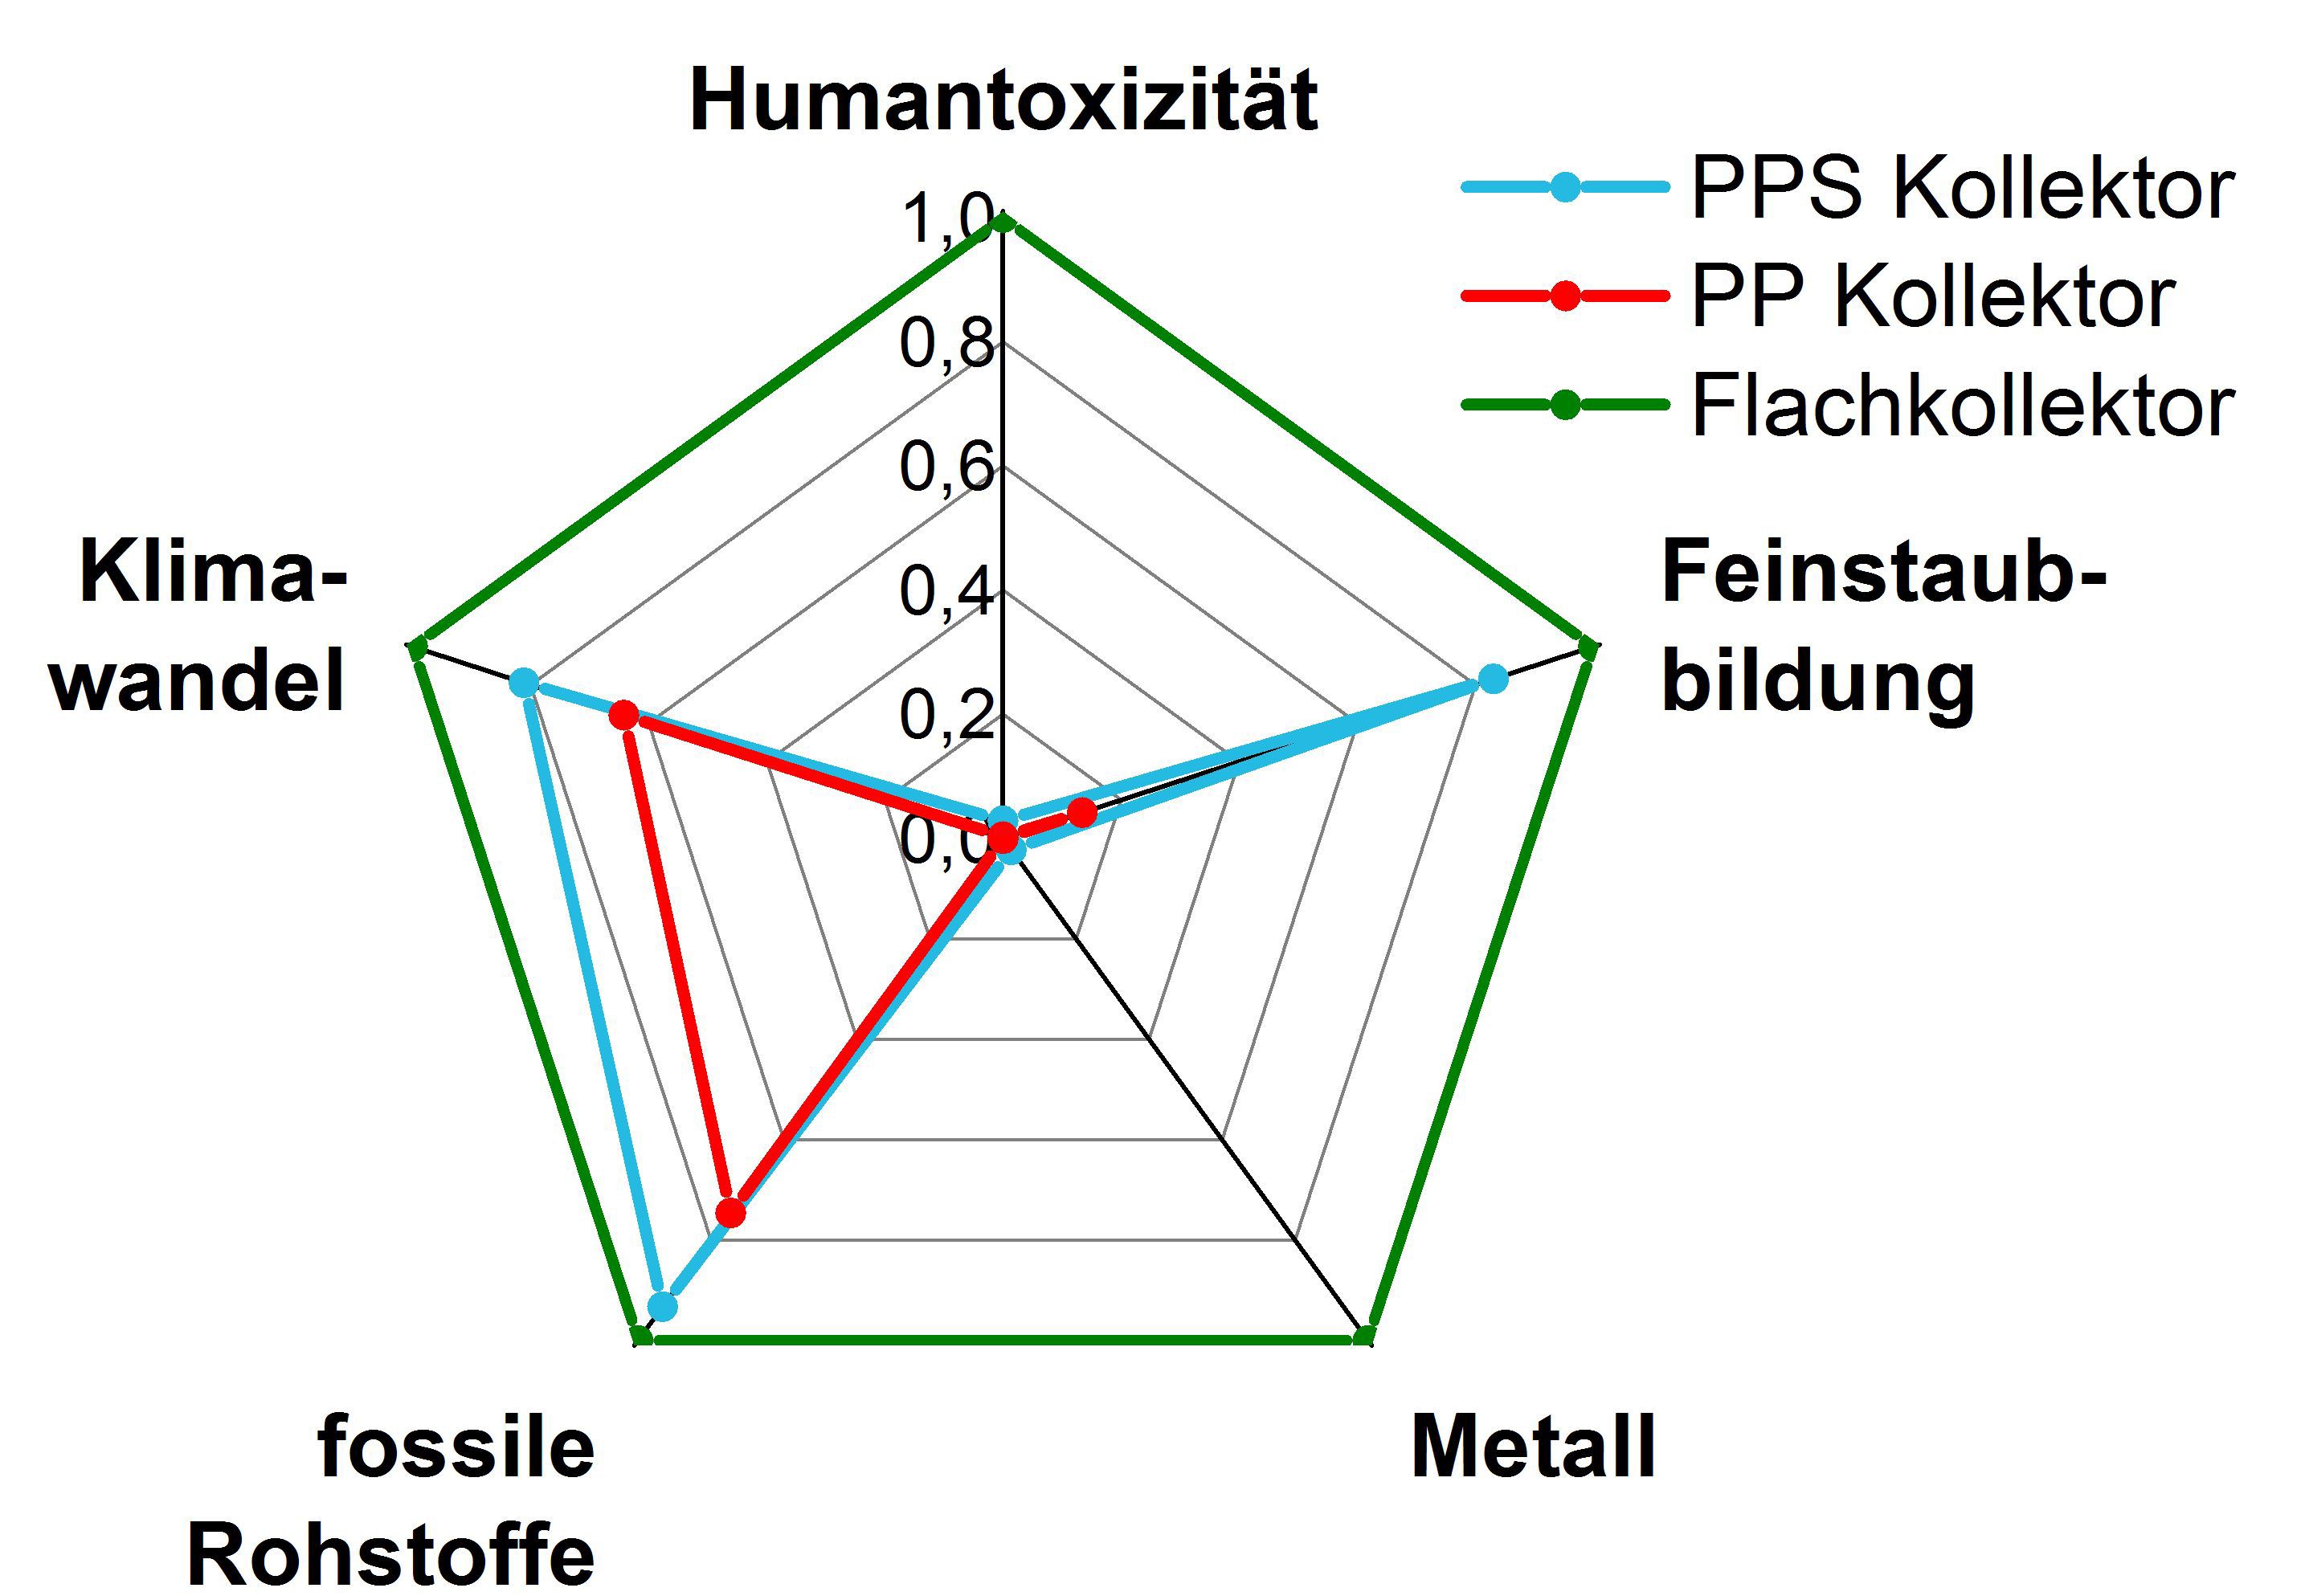 A comparison of the environmental footprints: The values for extruded polymer collectors are less than those for standard flat plate collectors with an aluminium-copper absorber.